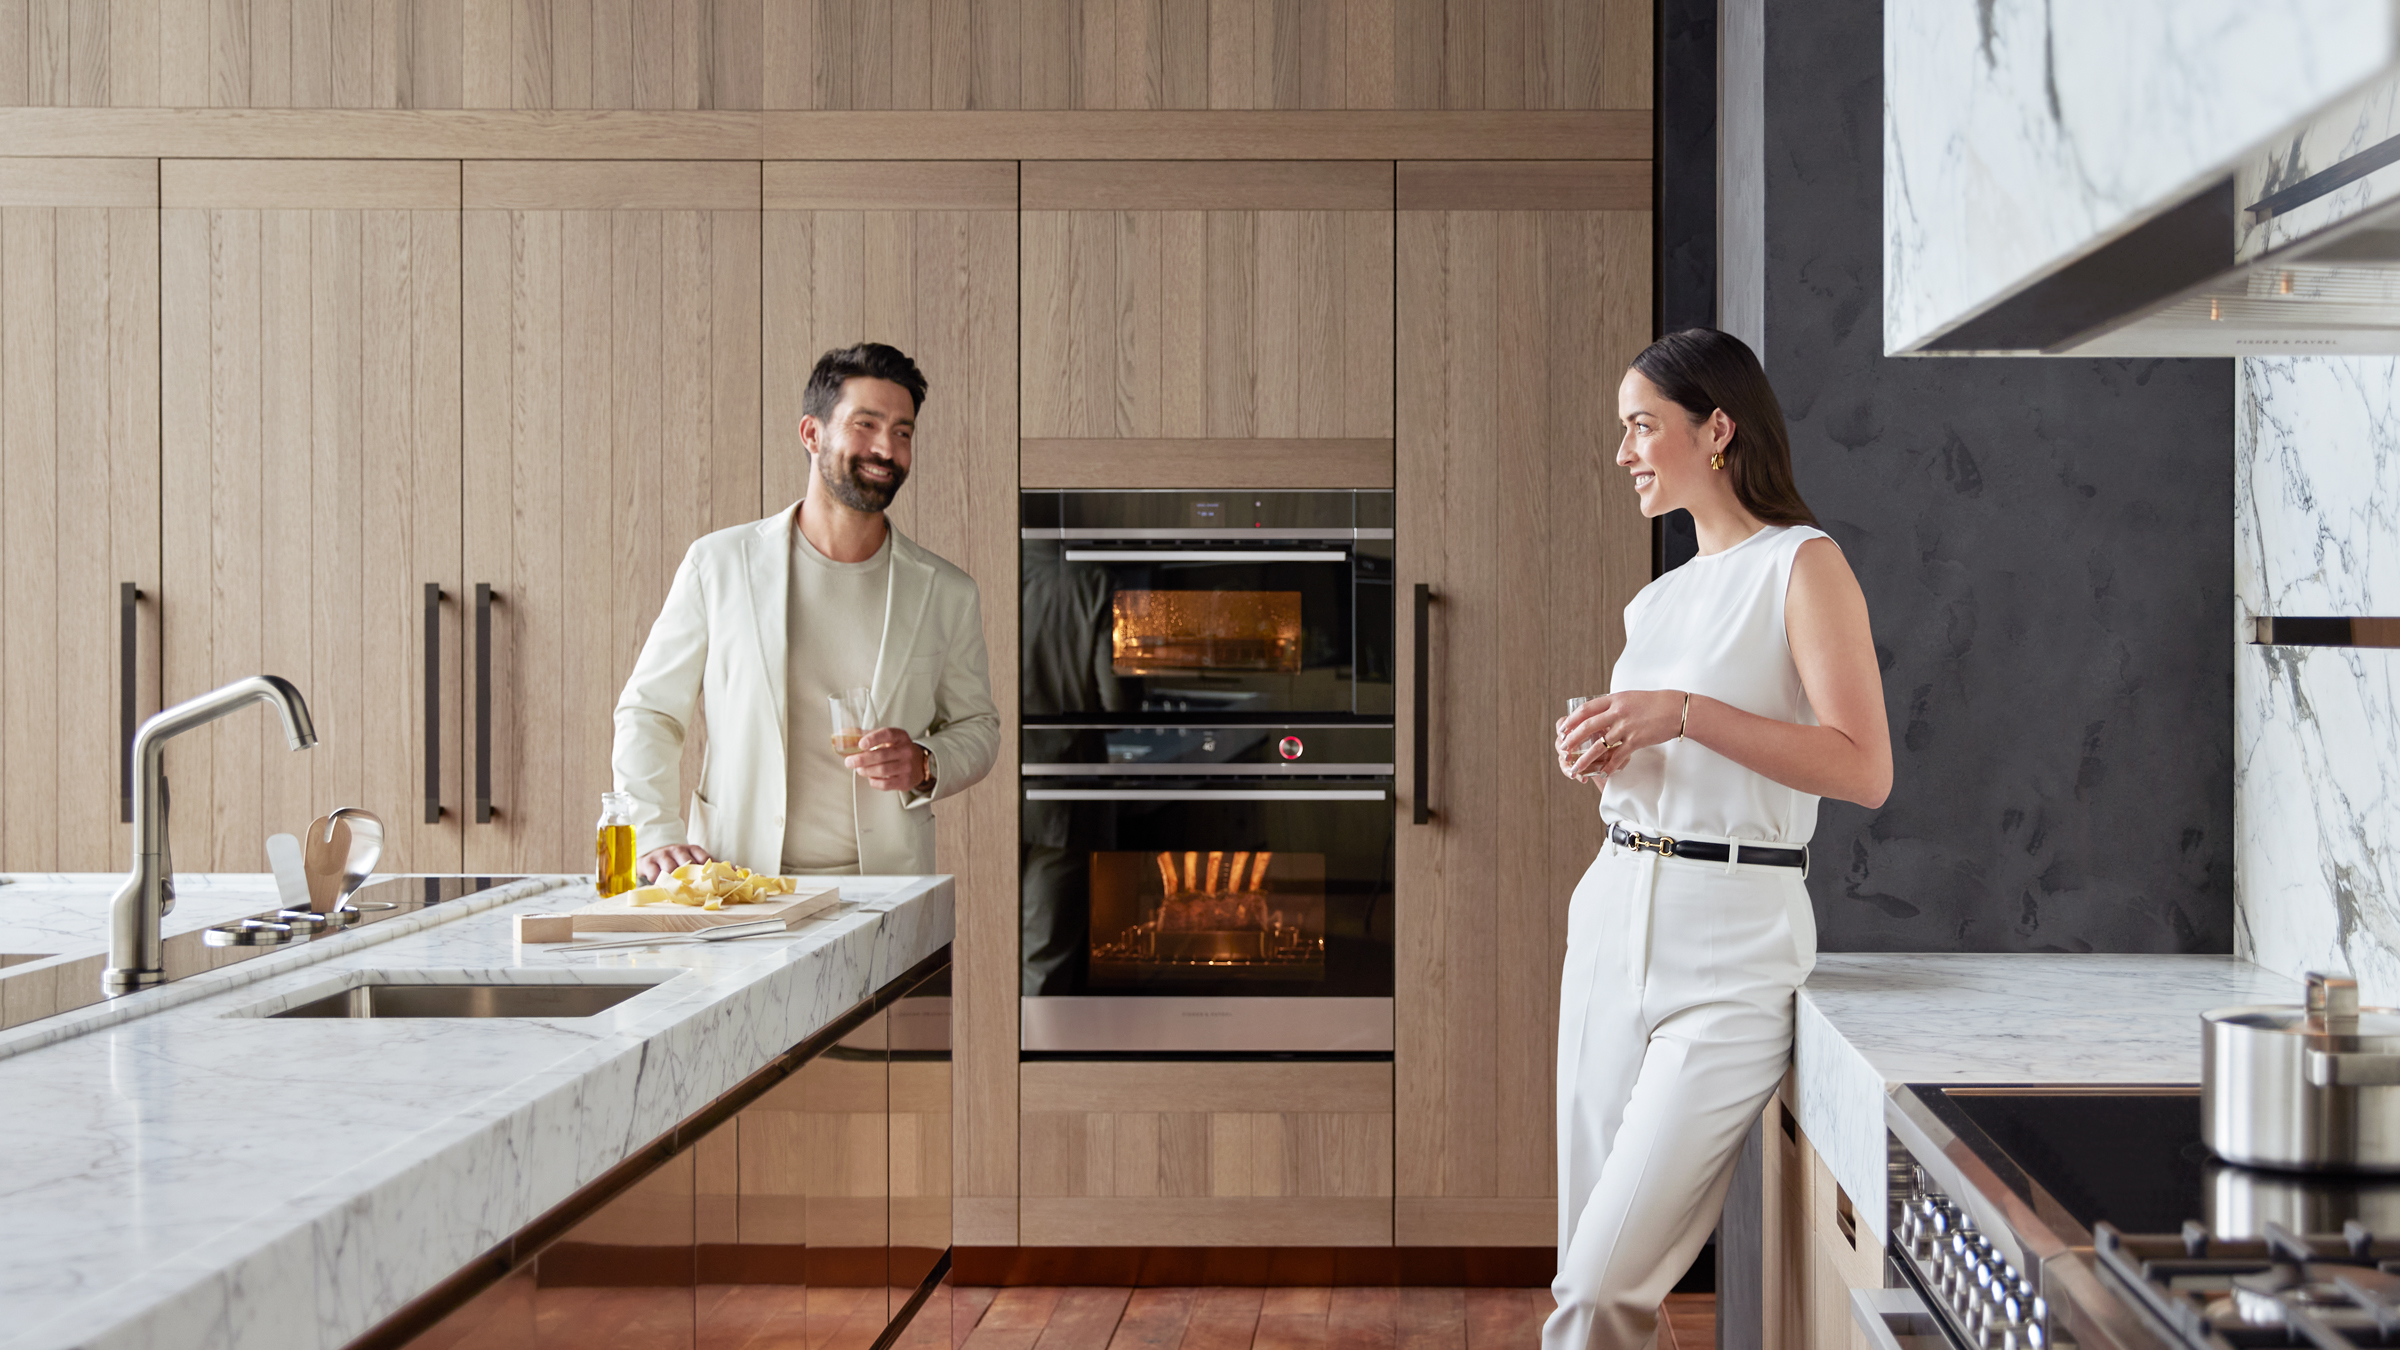 A couple stand conversing in a kitchen featuring light timber cabinetry